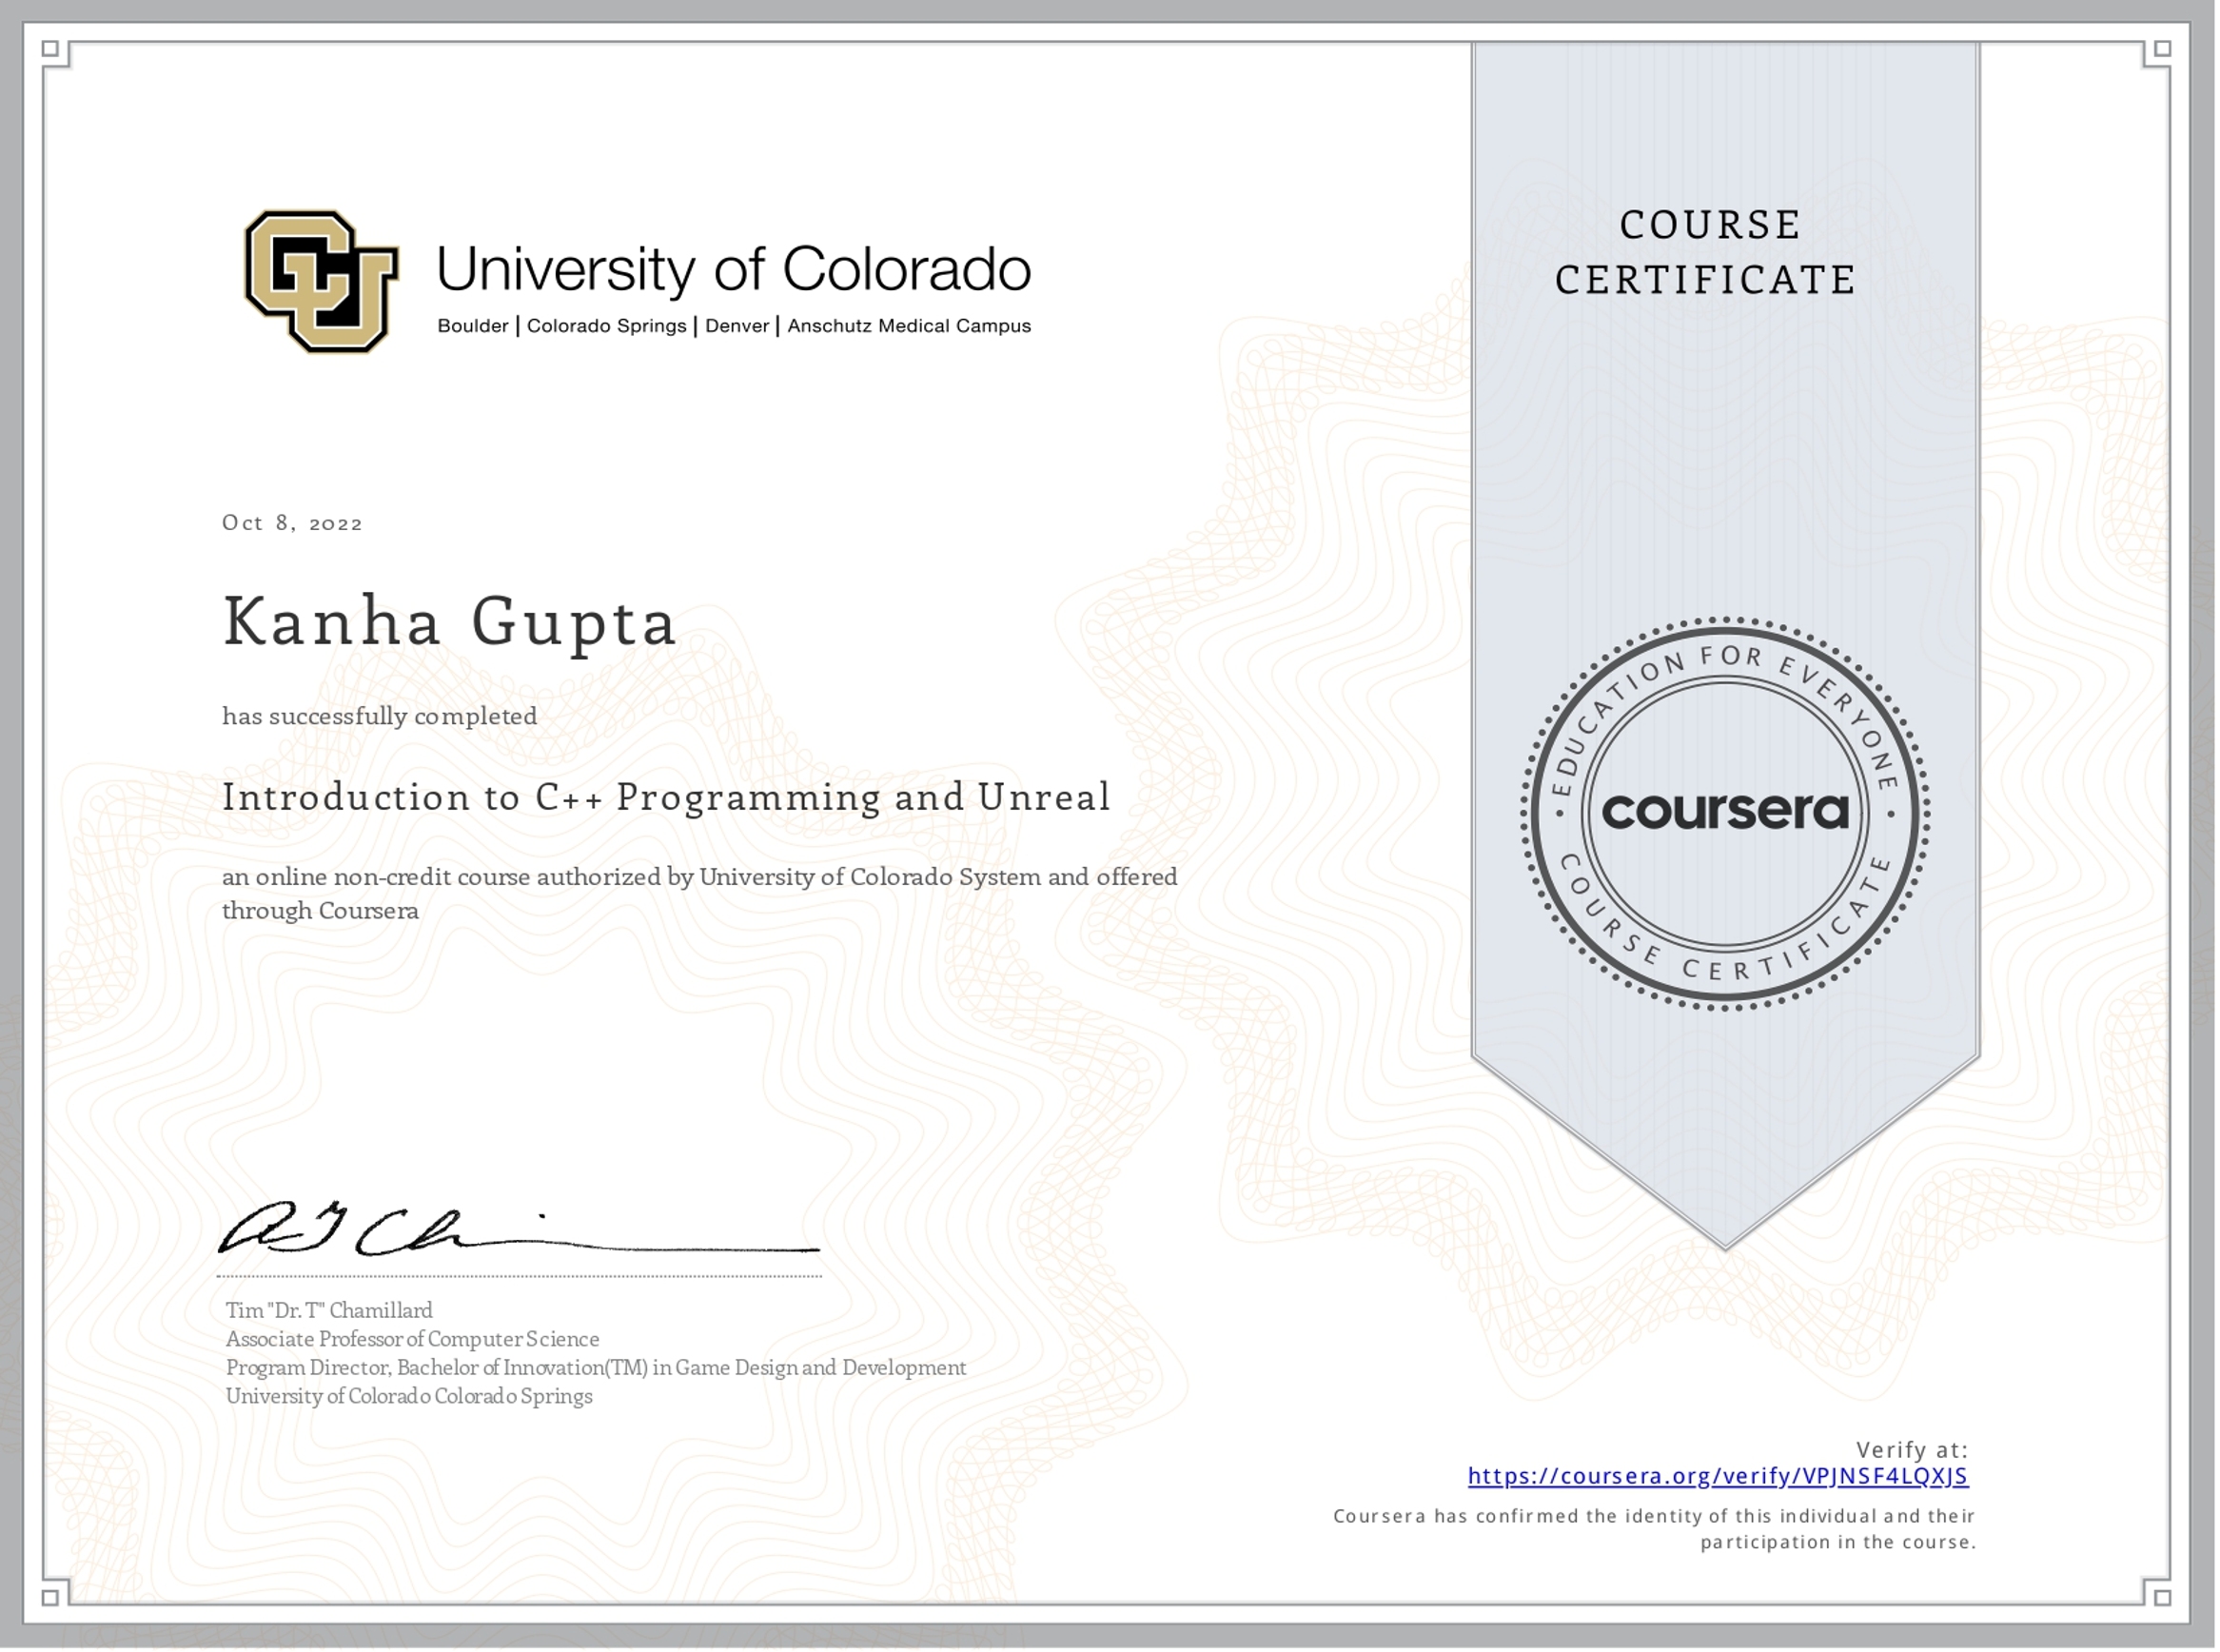 Introduction to C++ Programming and Unreal, Authorized By University Of Colorado & Offered Through Coursera